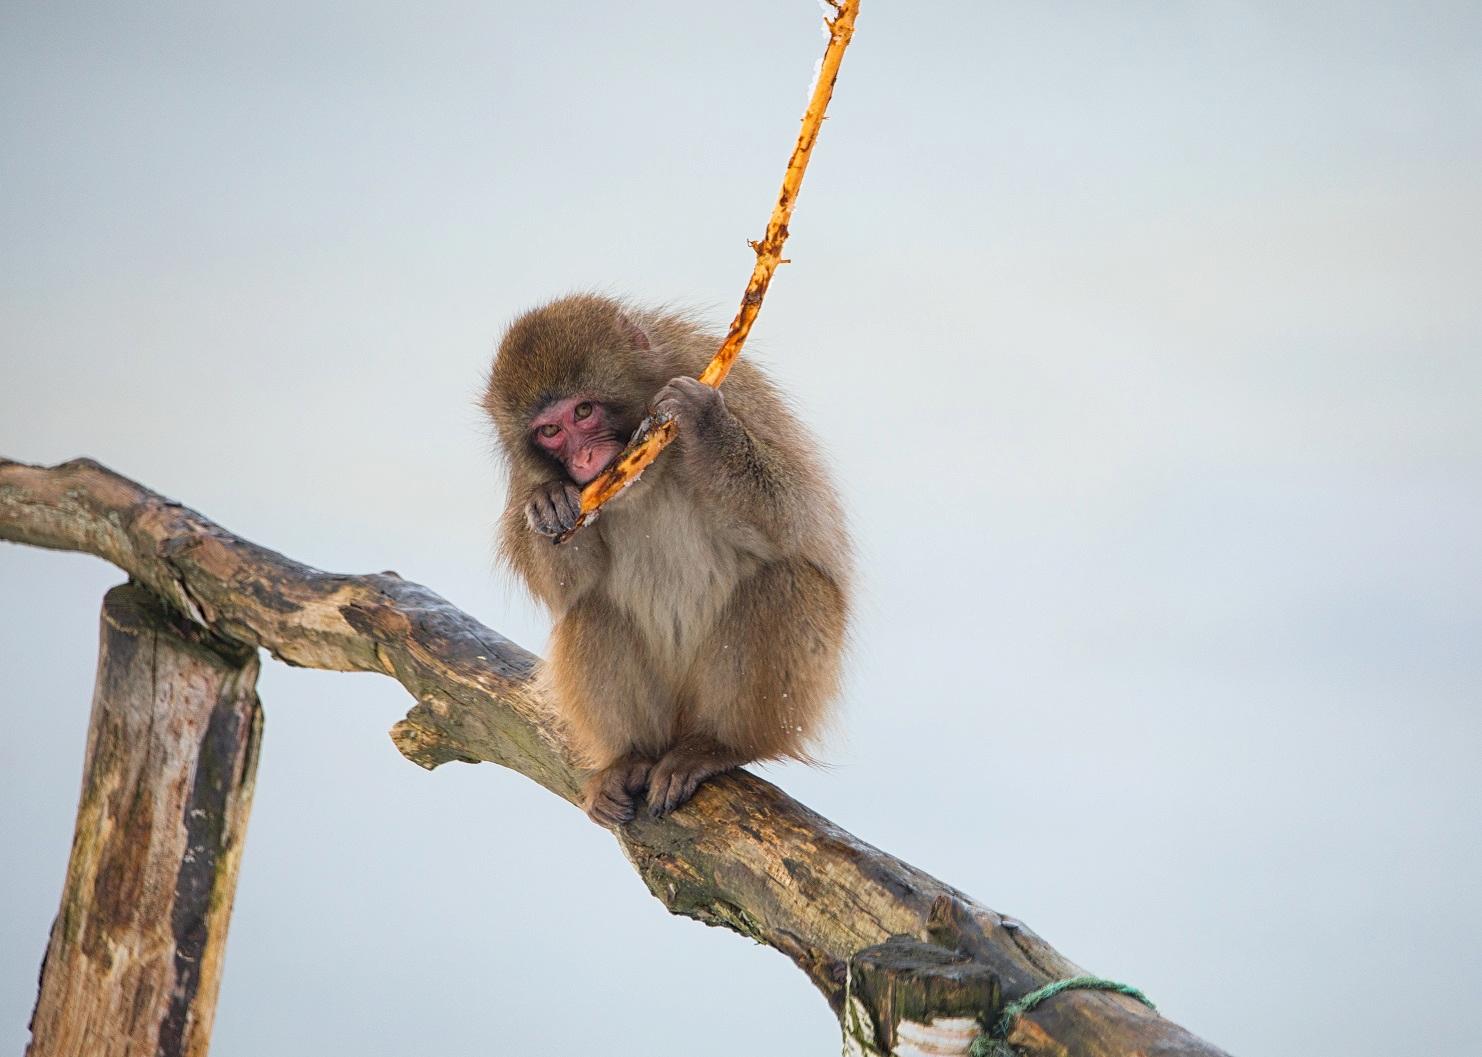 Japanese macaque sitting on a branch IMAGE: Sian Addison 2018